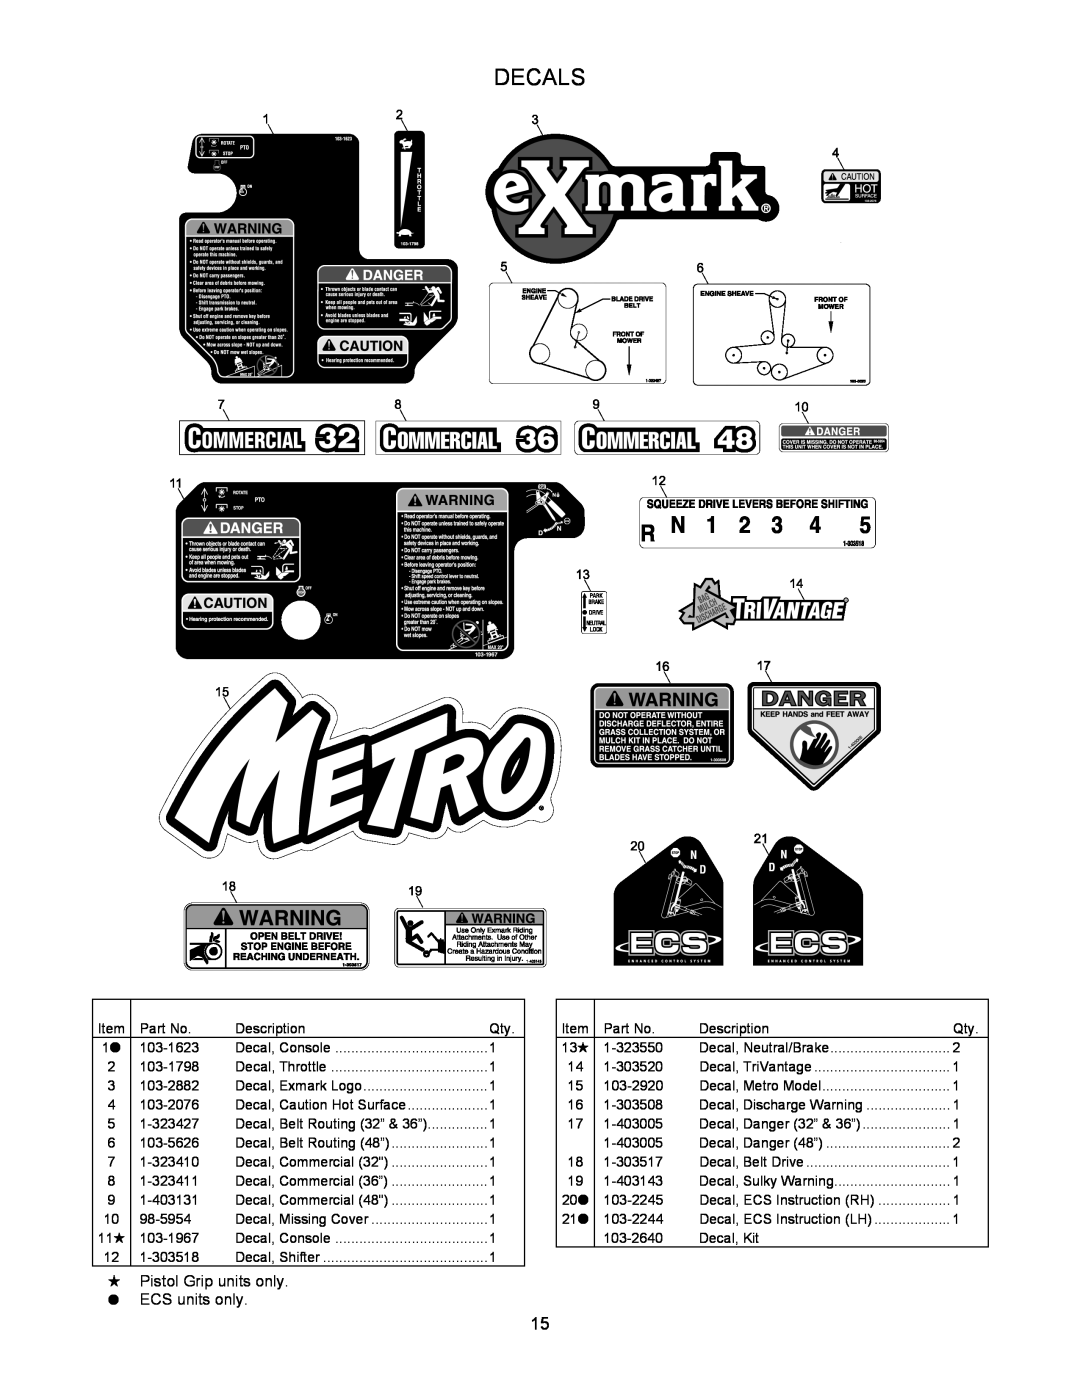 Exmark 4500-353 manual Decals, Pistol Grip units only ECS units only 